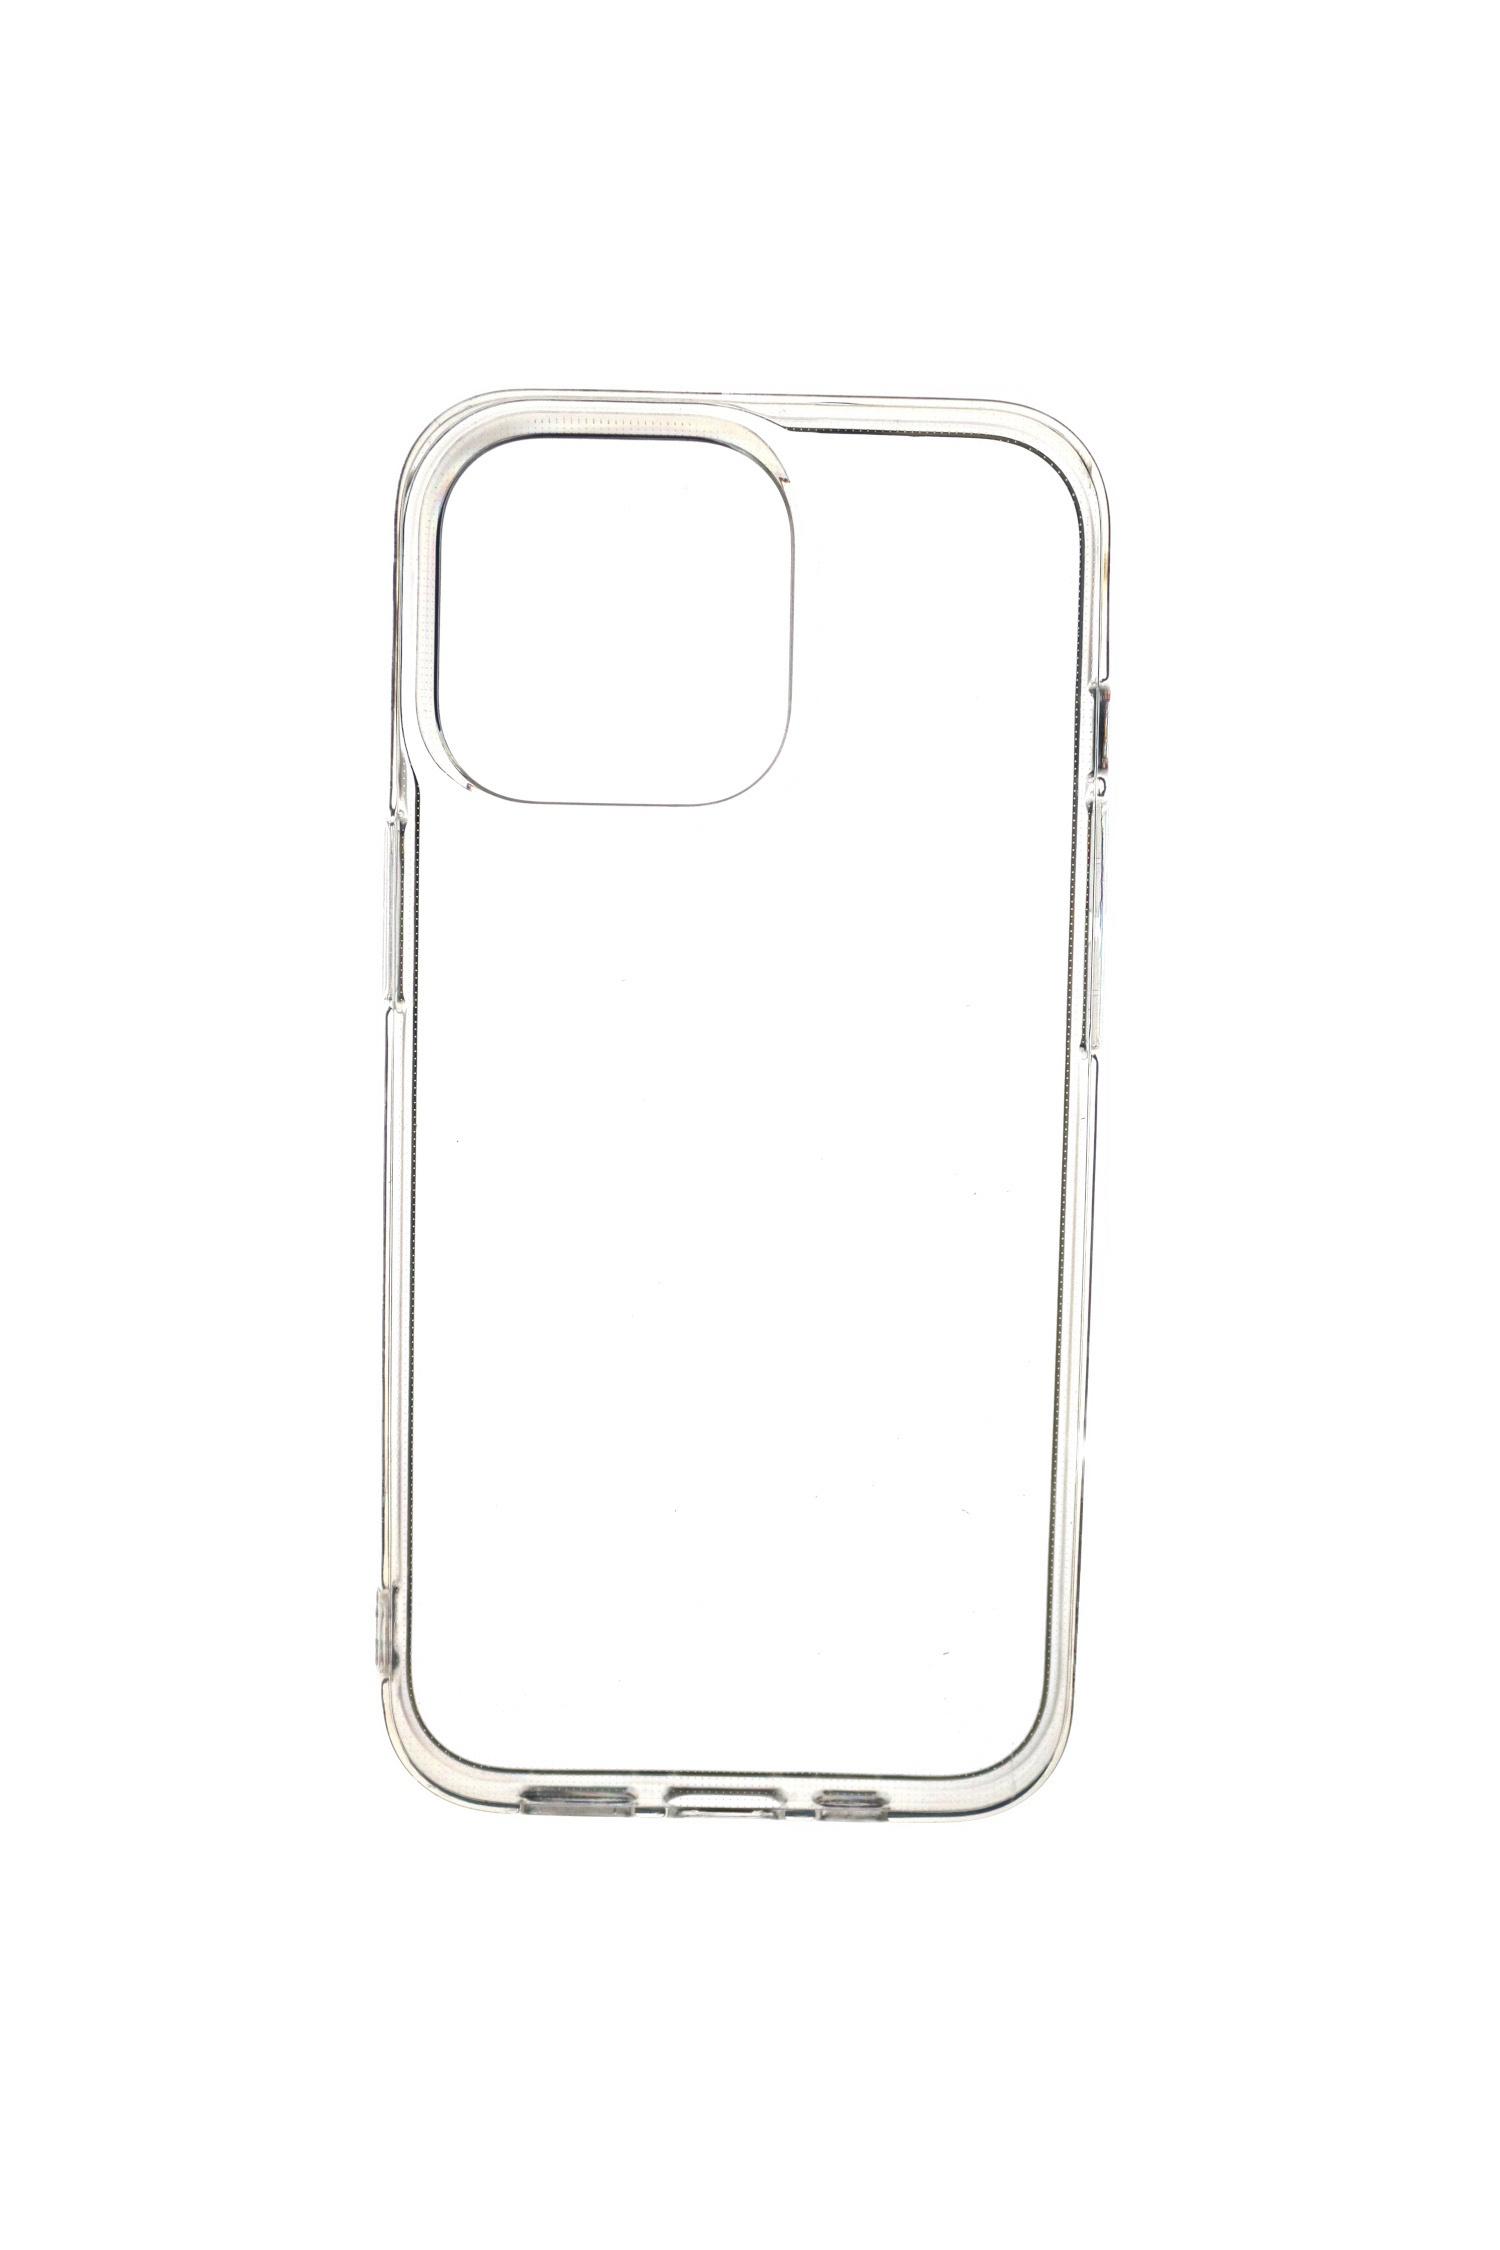 JAMCOVER 2.0 mm TPU Apple, Strong, Backcover, Pro, Transparent 14 Case iPhone